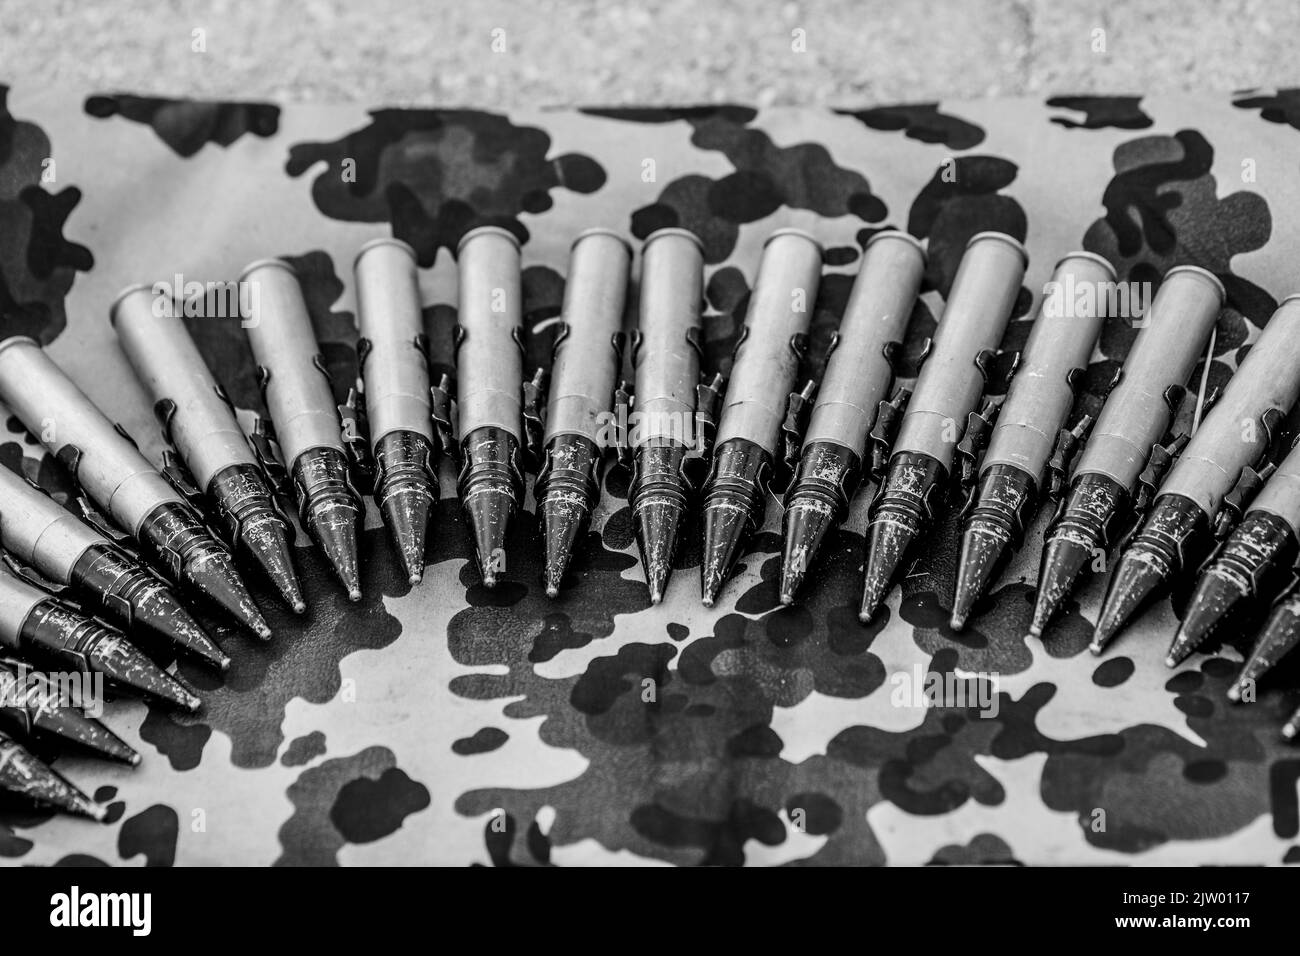 Details with 20mm ammunition for a military helicopter gun. Stock Photo